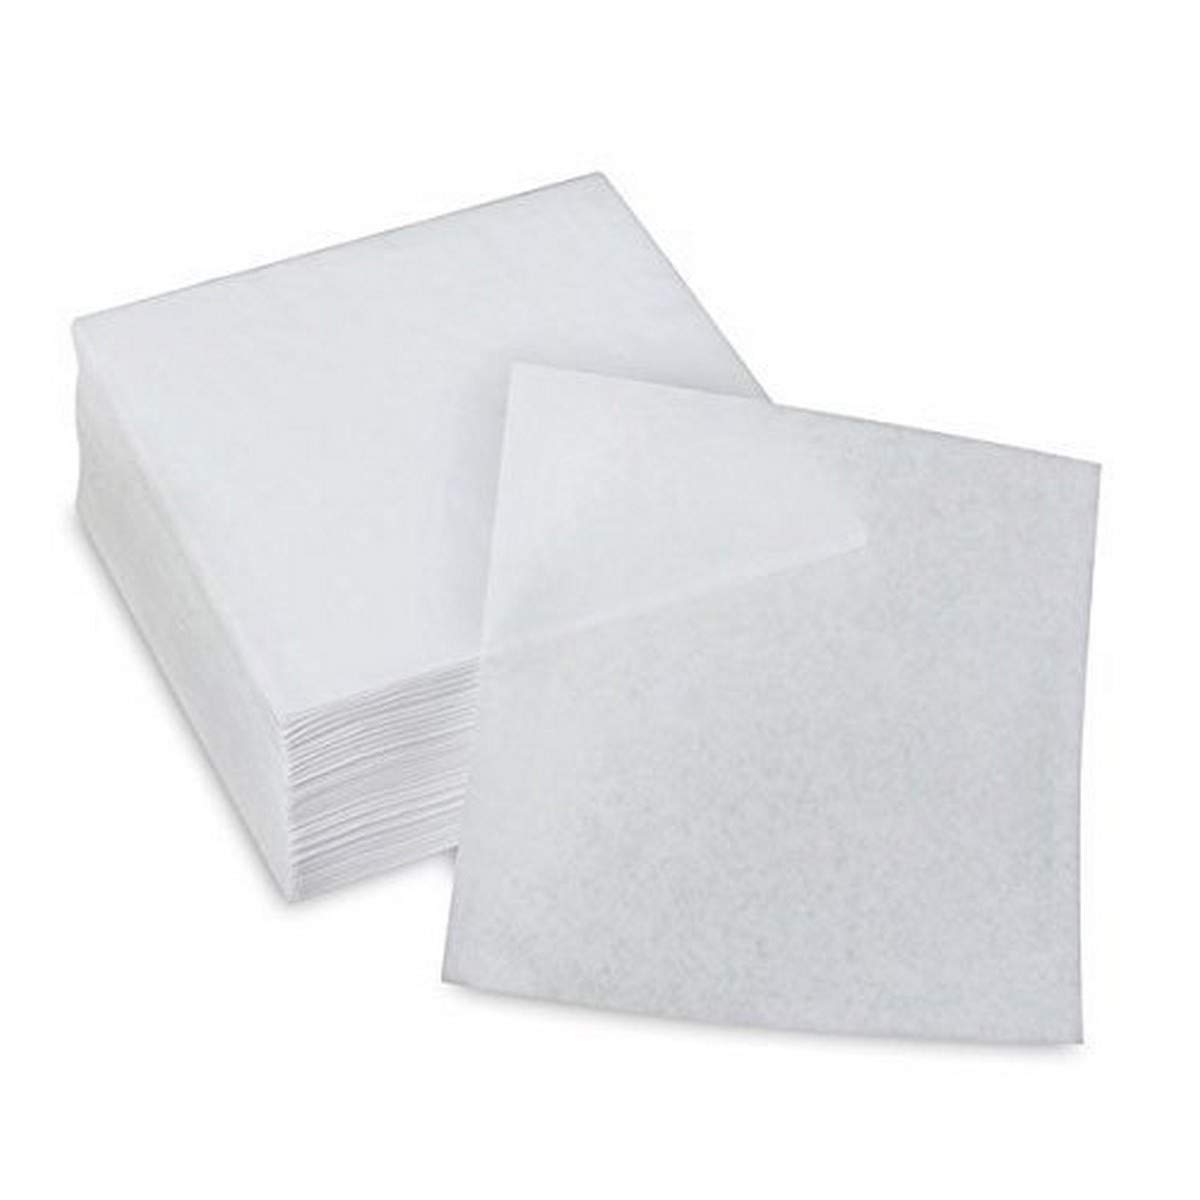 Framarx® Two-Ply Patty Paper Sheet - 5.188in